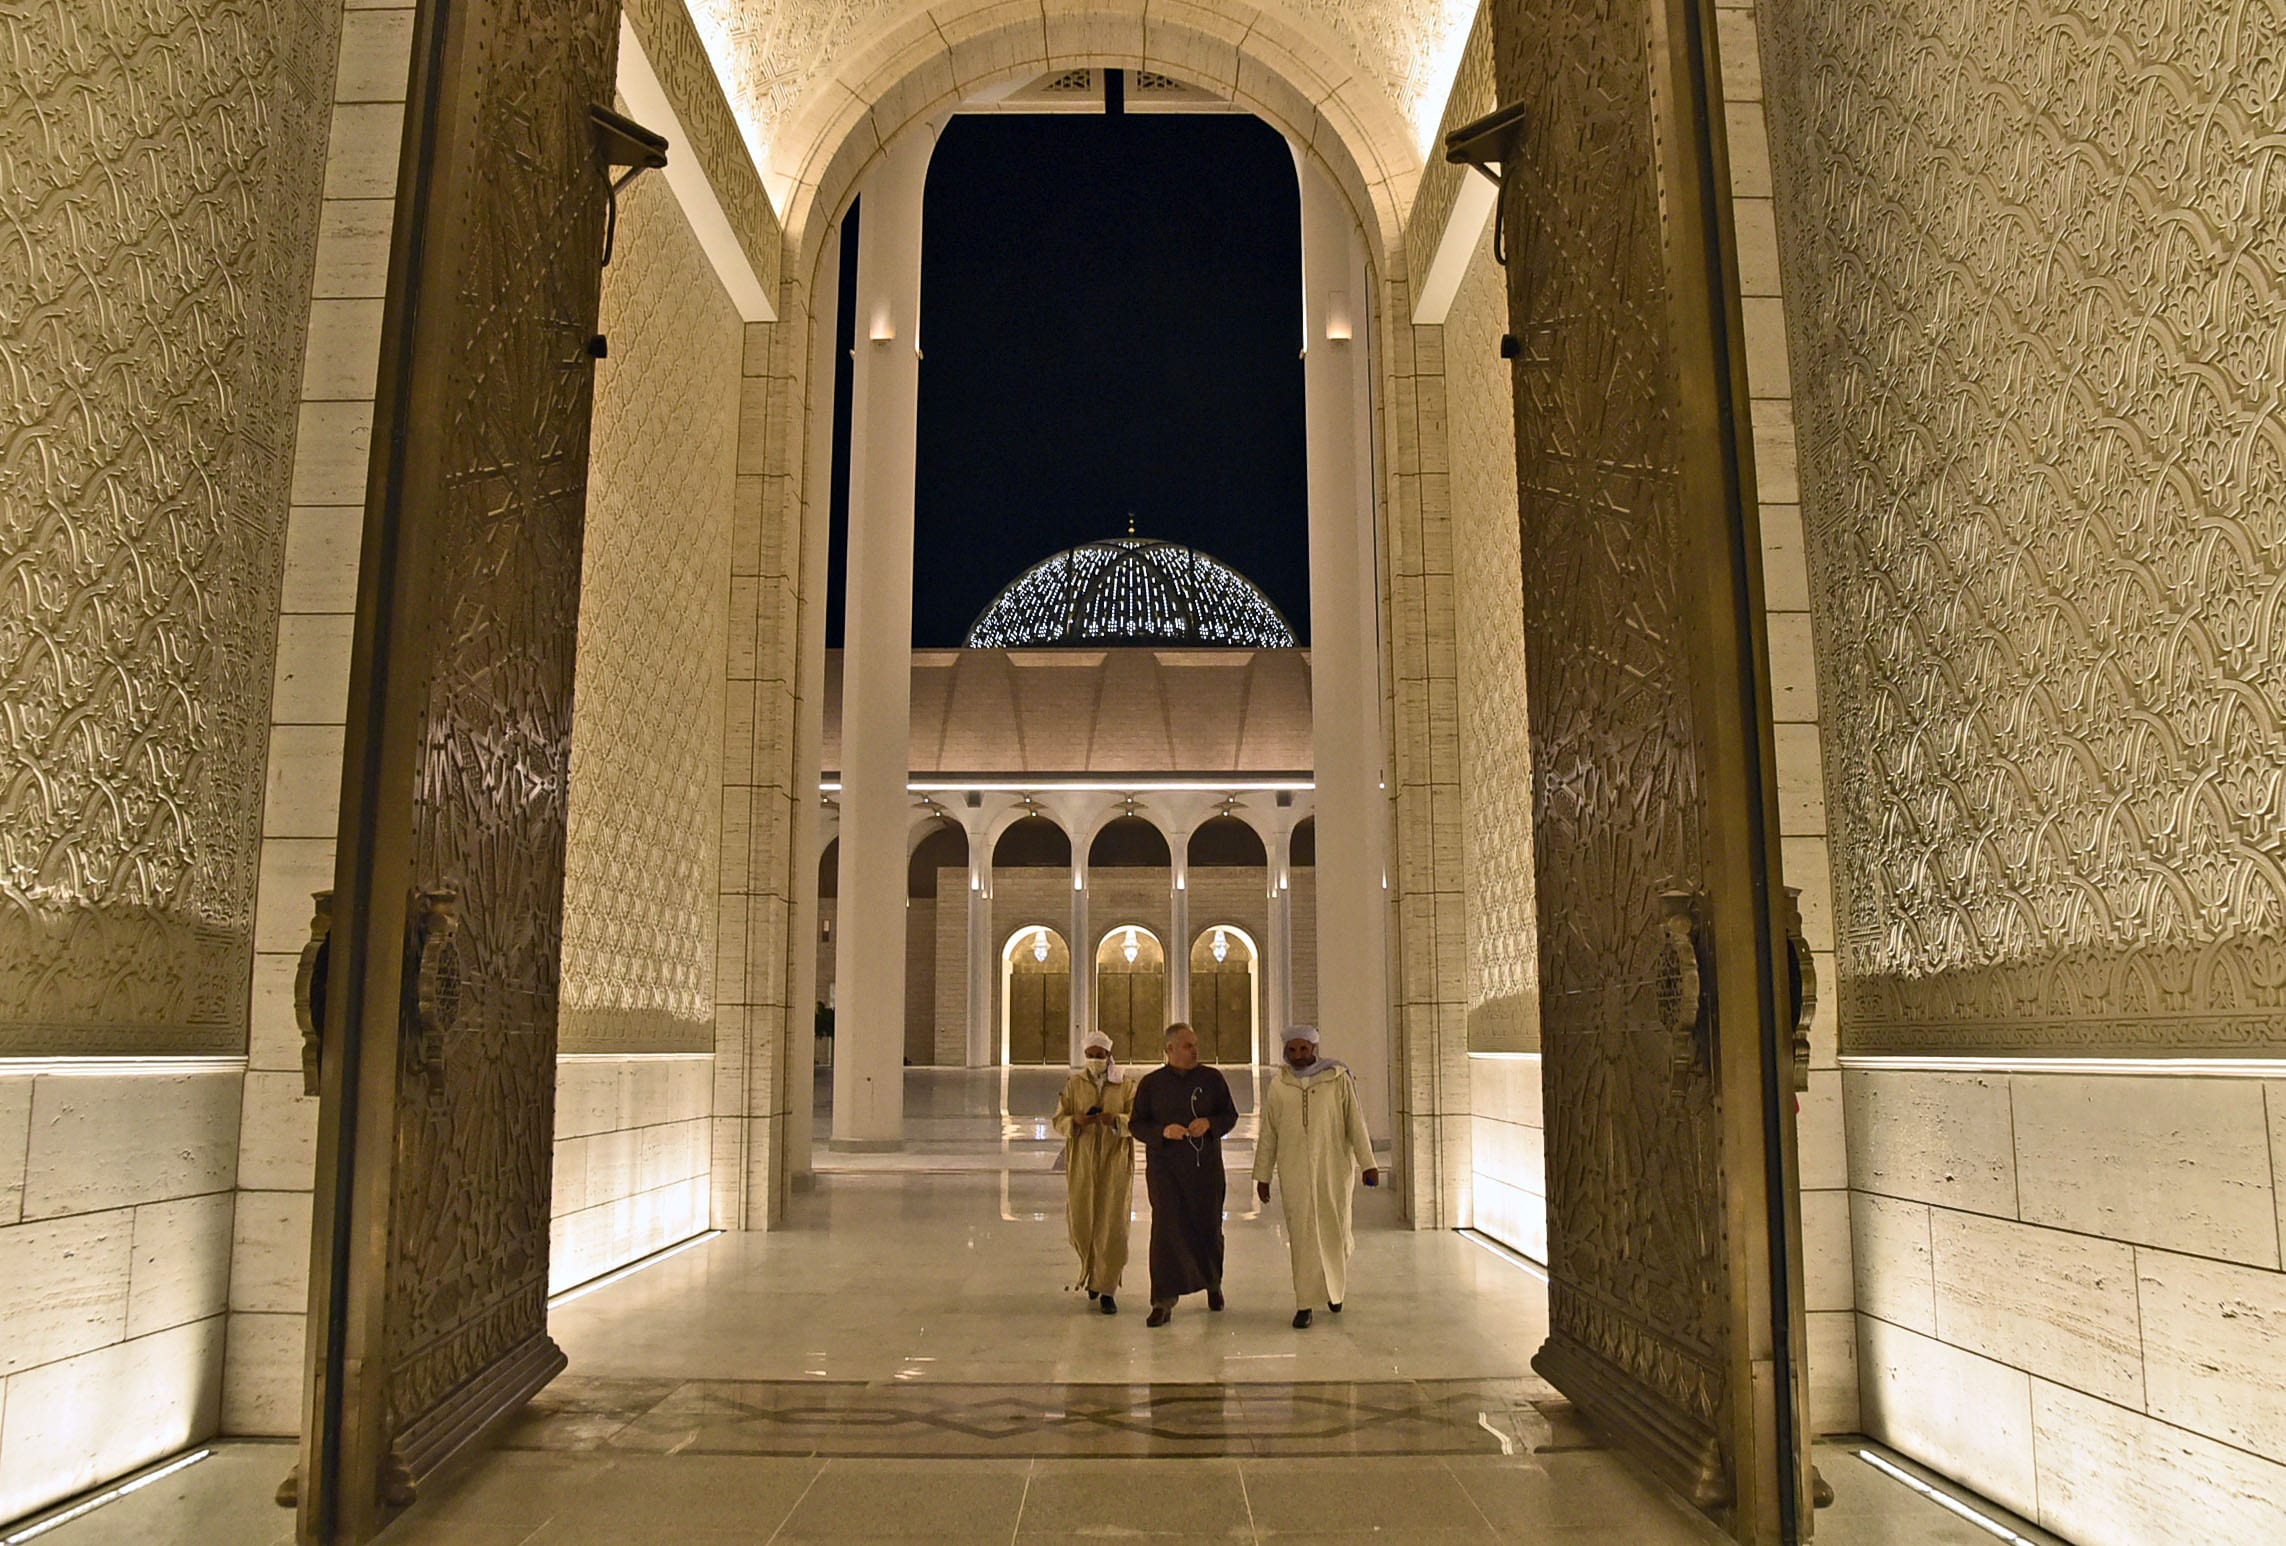 A picture taken on October 28, 2020 shows imams walking through the front door of the Great Mosque of Algiers, also known as Djamaa el-Djazair, during its inauguration in the Algerian capital. - Algeria's Grand Mosque, the world's third-biggest and Africa's largest, hosted its first public prayers yesterday, a year and a half after construction was completed. Known locally as the Djamaa El-Djazair, the modernist structure extends across 27.75 hectares (almost 70 acres), and is smaller only than the two mosques in Mecca and Medina, Islam's holiest sites, in Saudi Arabia. (Photo by RYAD KRAMDI / AFP) (Photo by RYAD KRAMDI/AFP via Getty Images)